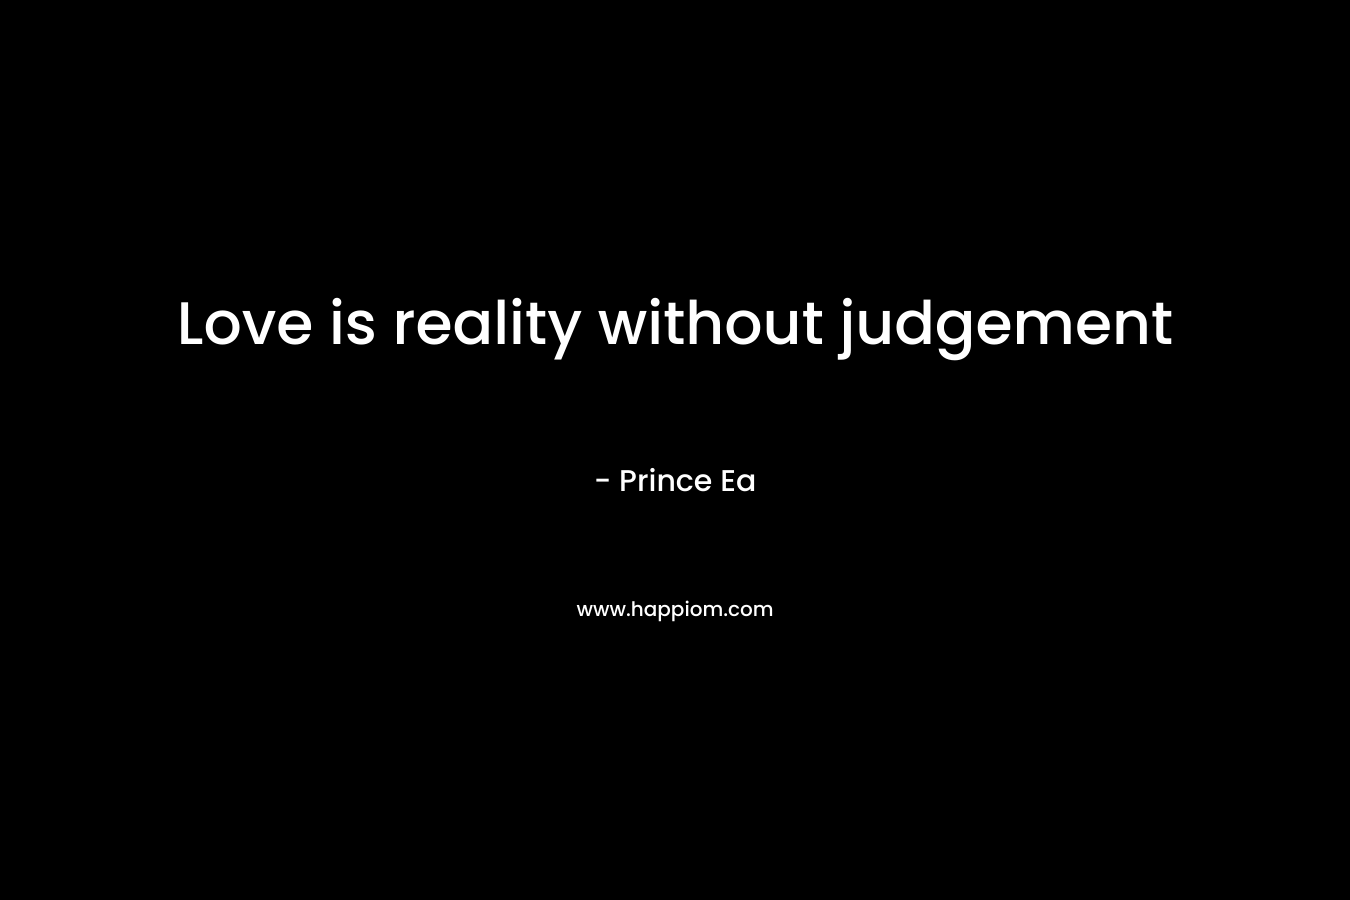 Love is reality without judgement